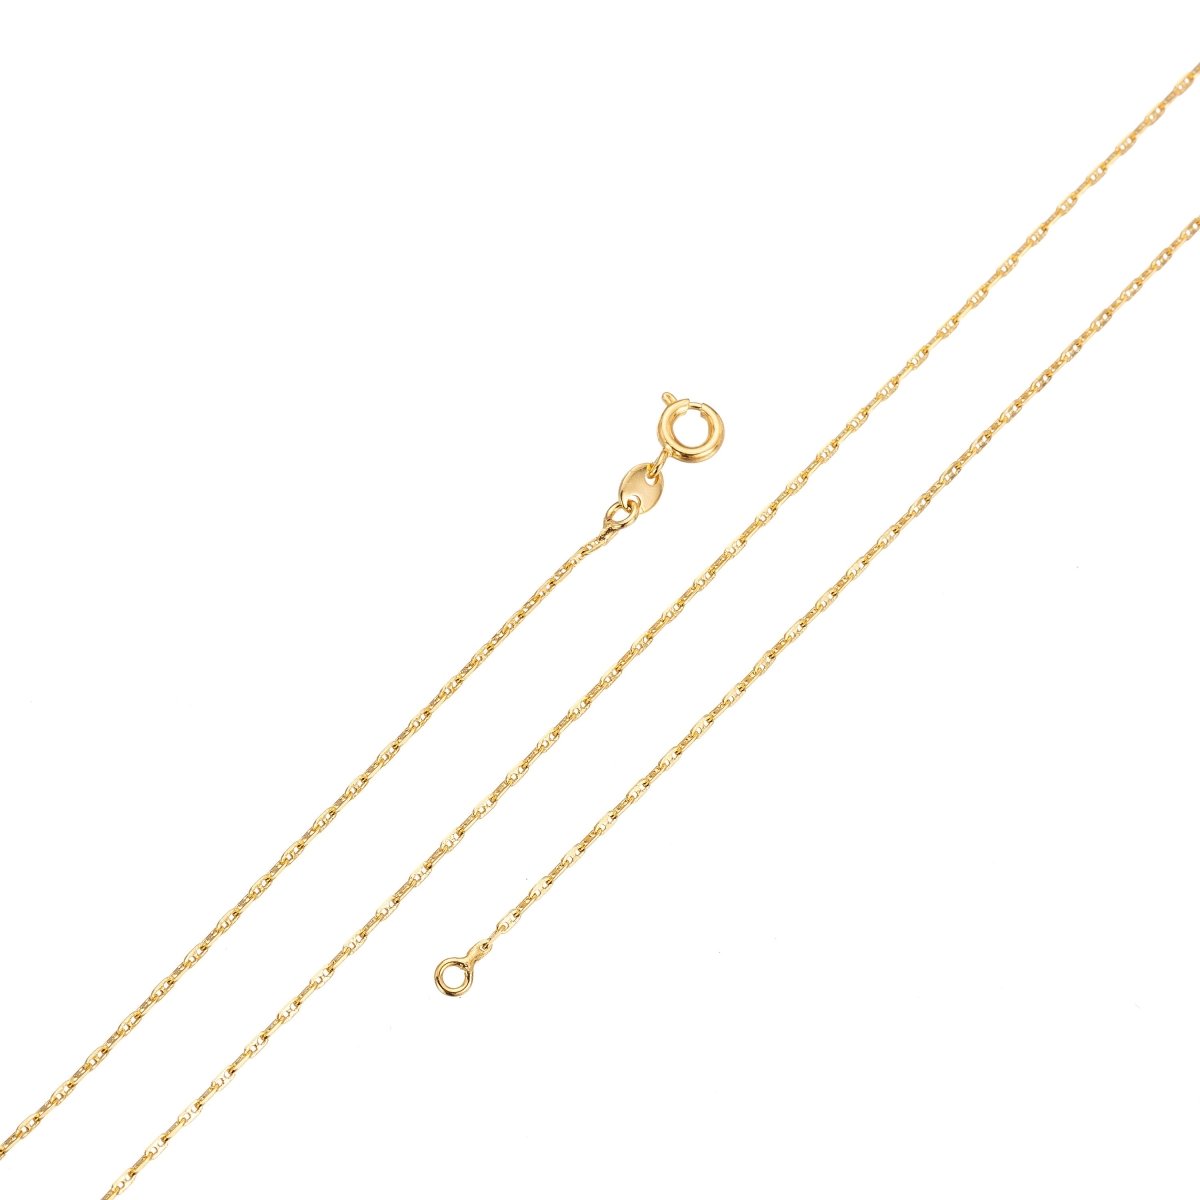 24K Gold Plated 20 inches Anchor Necklace, Dainty 1.4mm Anchor Necklace w/ Spring Ring | CN-238 Clearance Pricing - DLUXCA